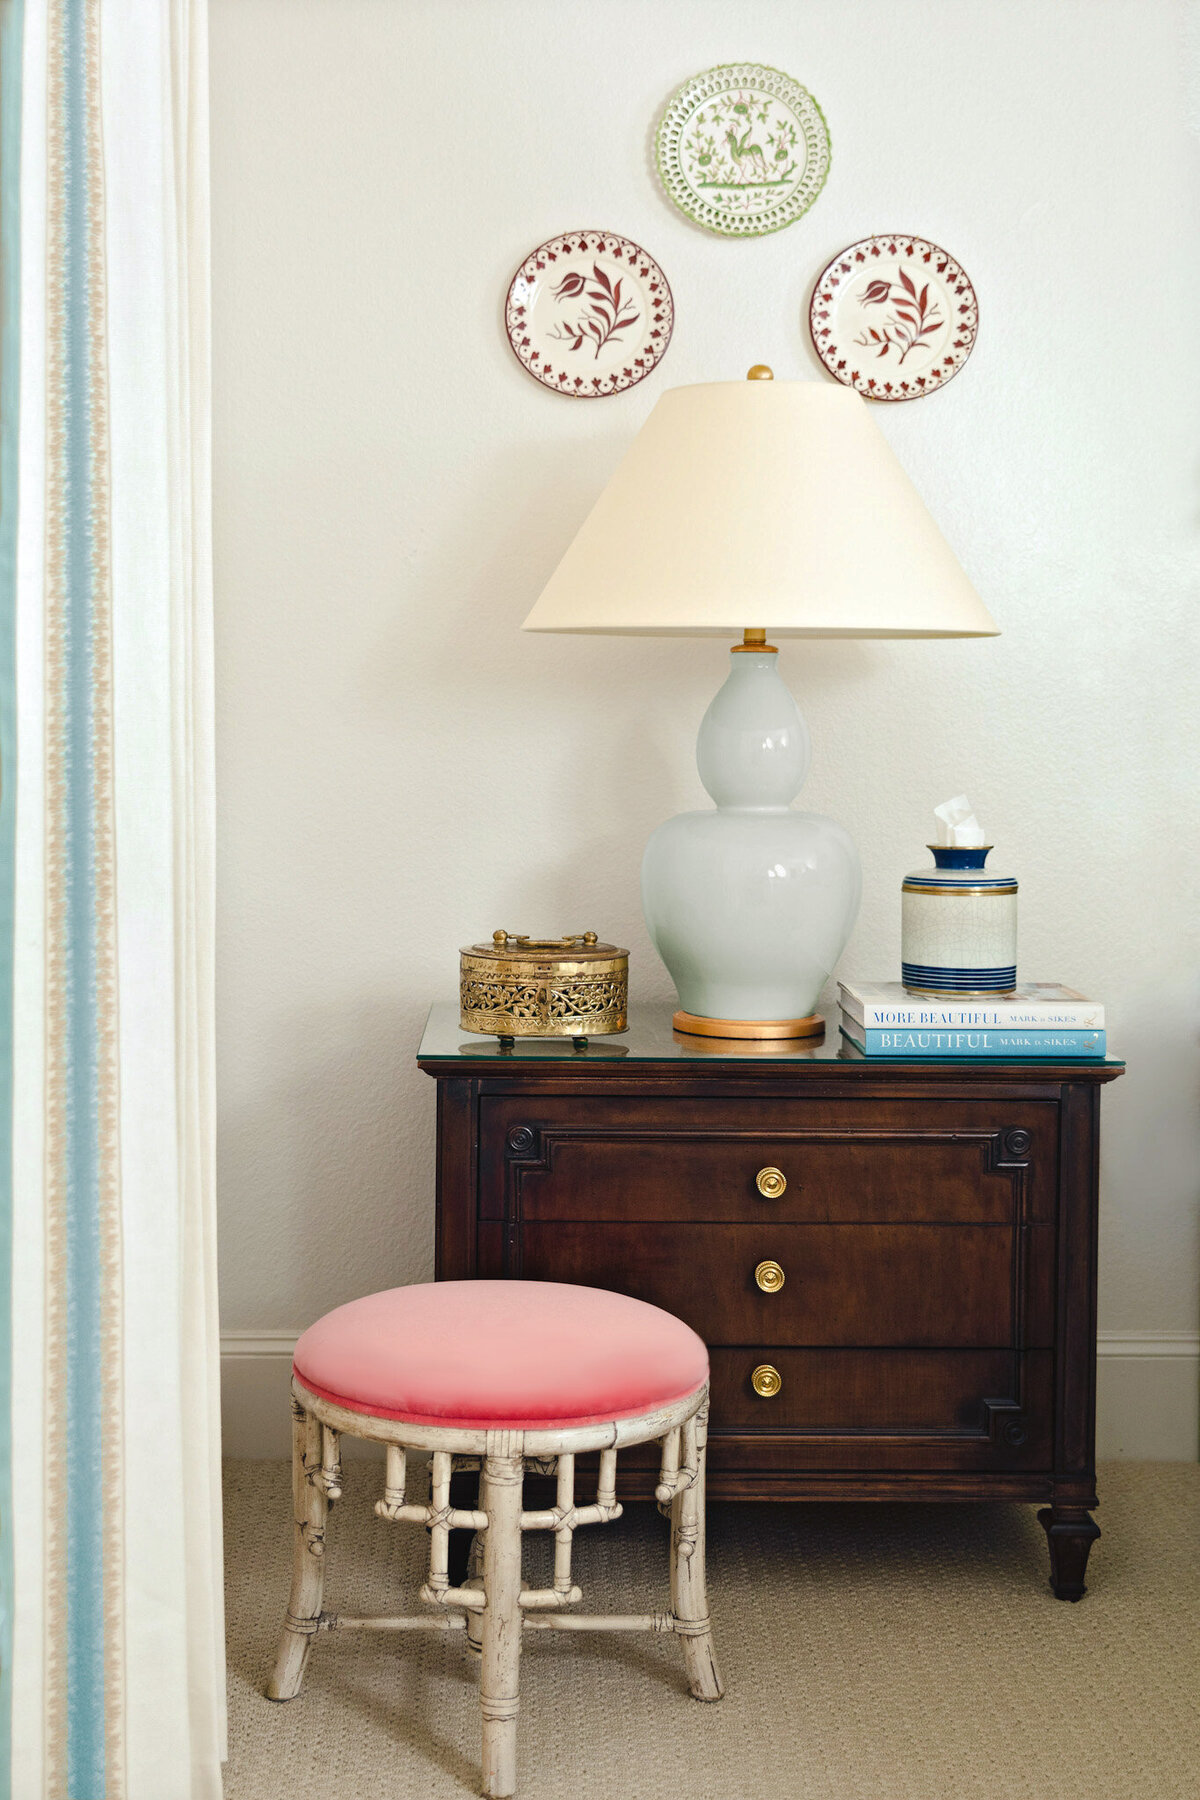 Wood nightstand with light blue table lamp and decorative accessories. Pink round stool with bamboo legs and decorative wall plates hung as wall decor.